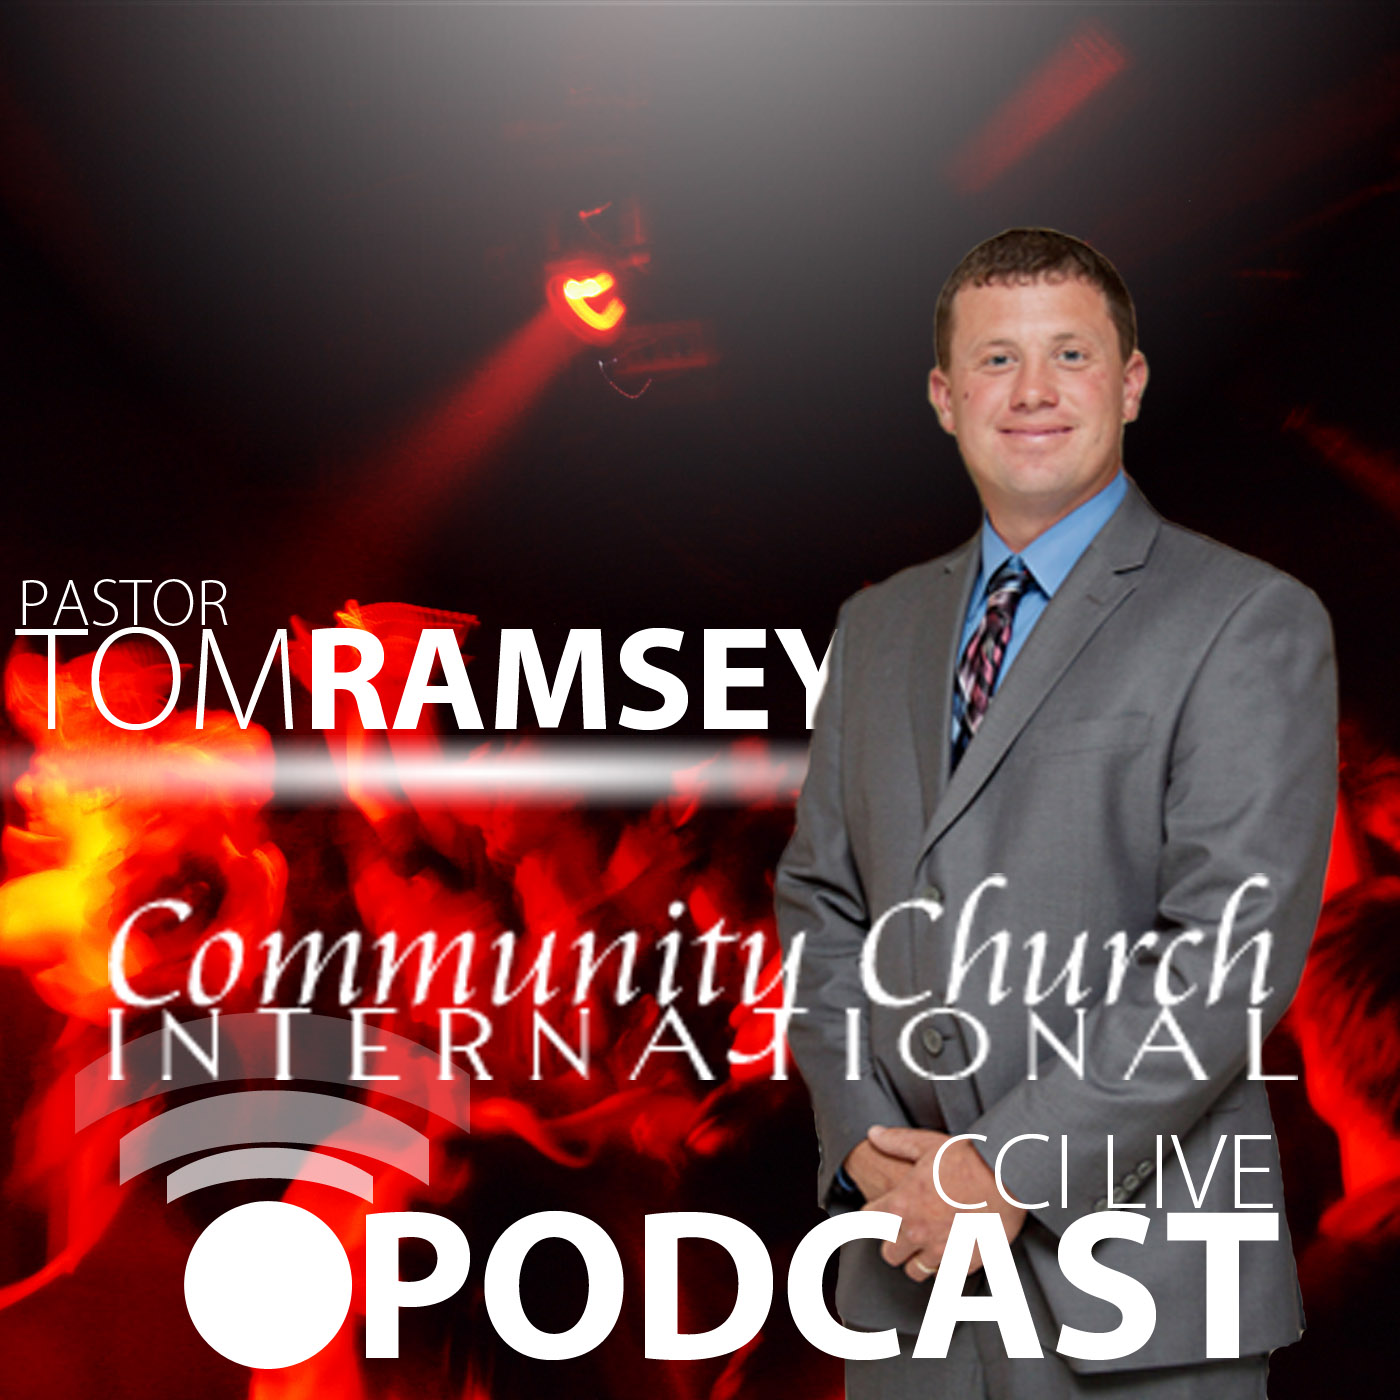 Don’t Miss the Extraordinary - Pastor Tom Ramsey